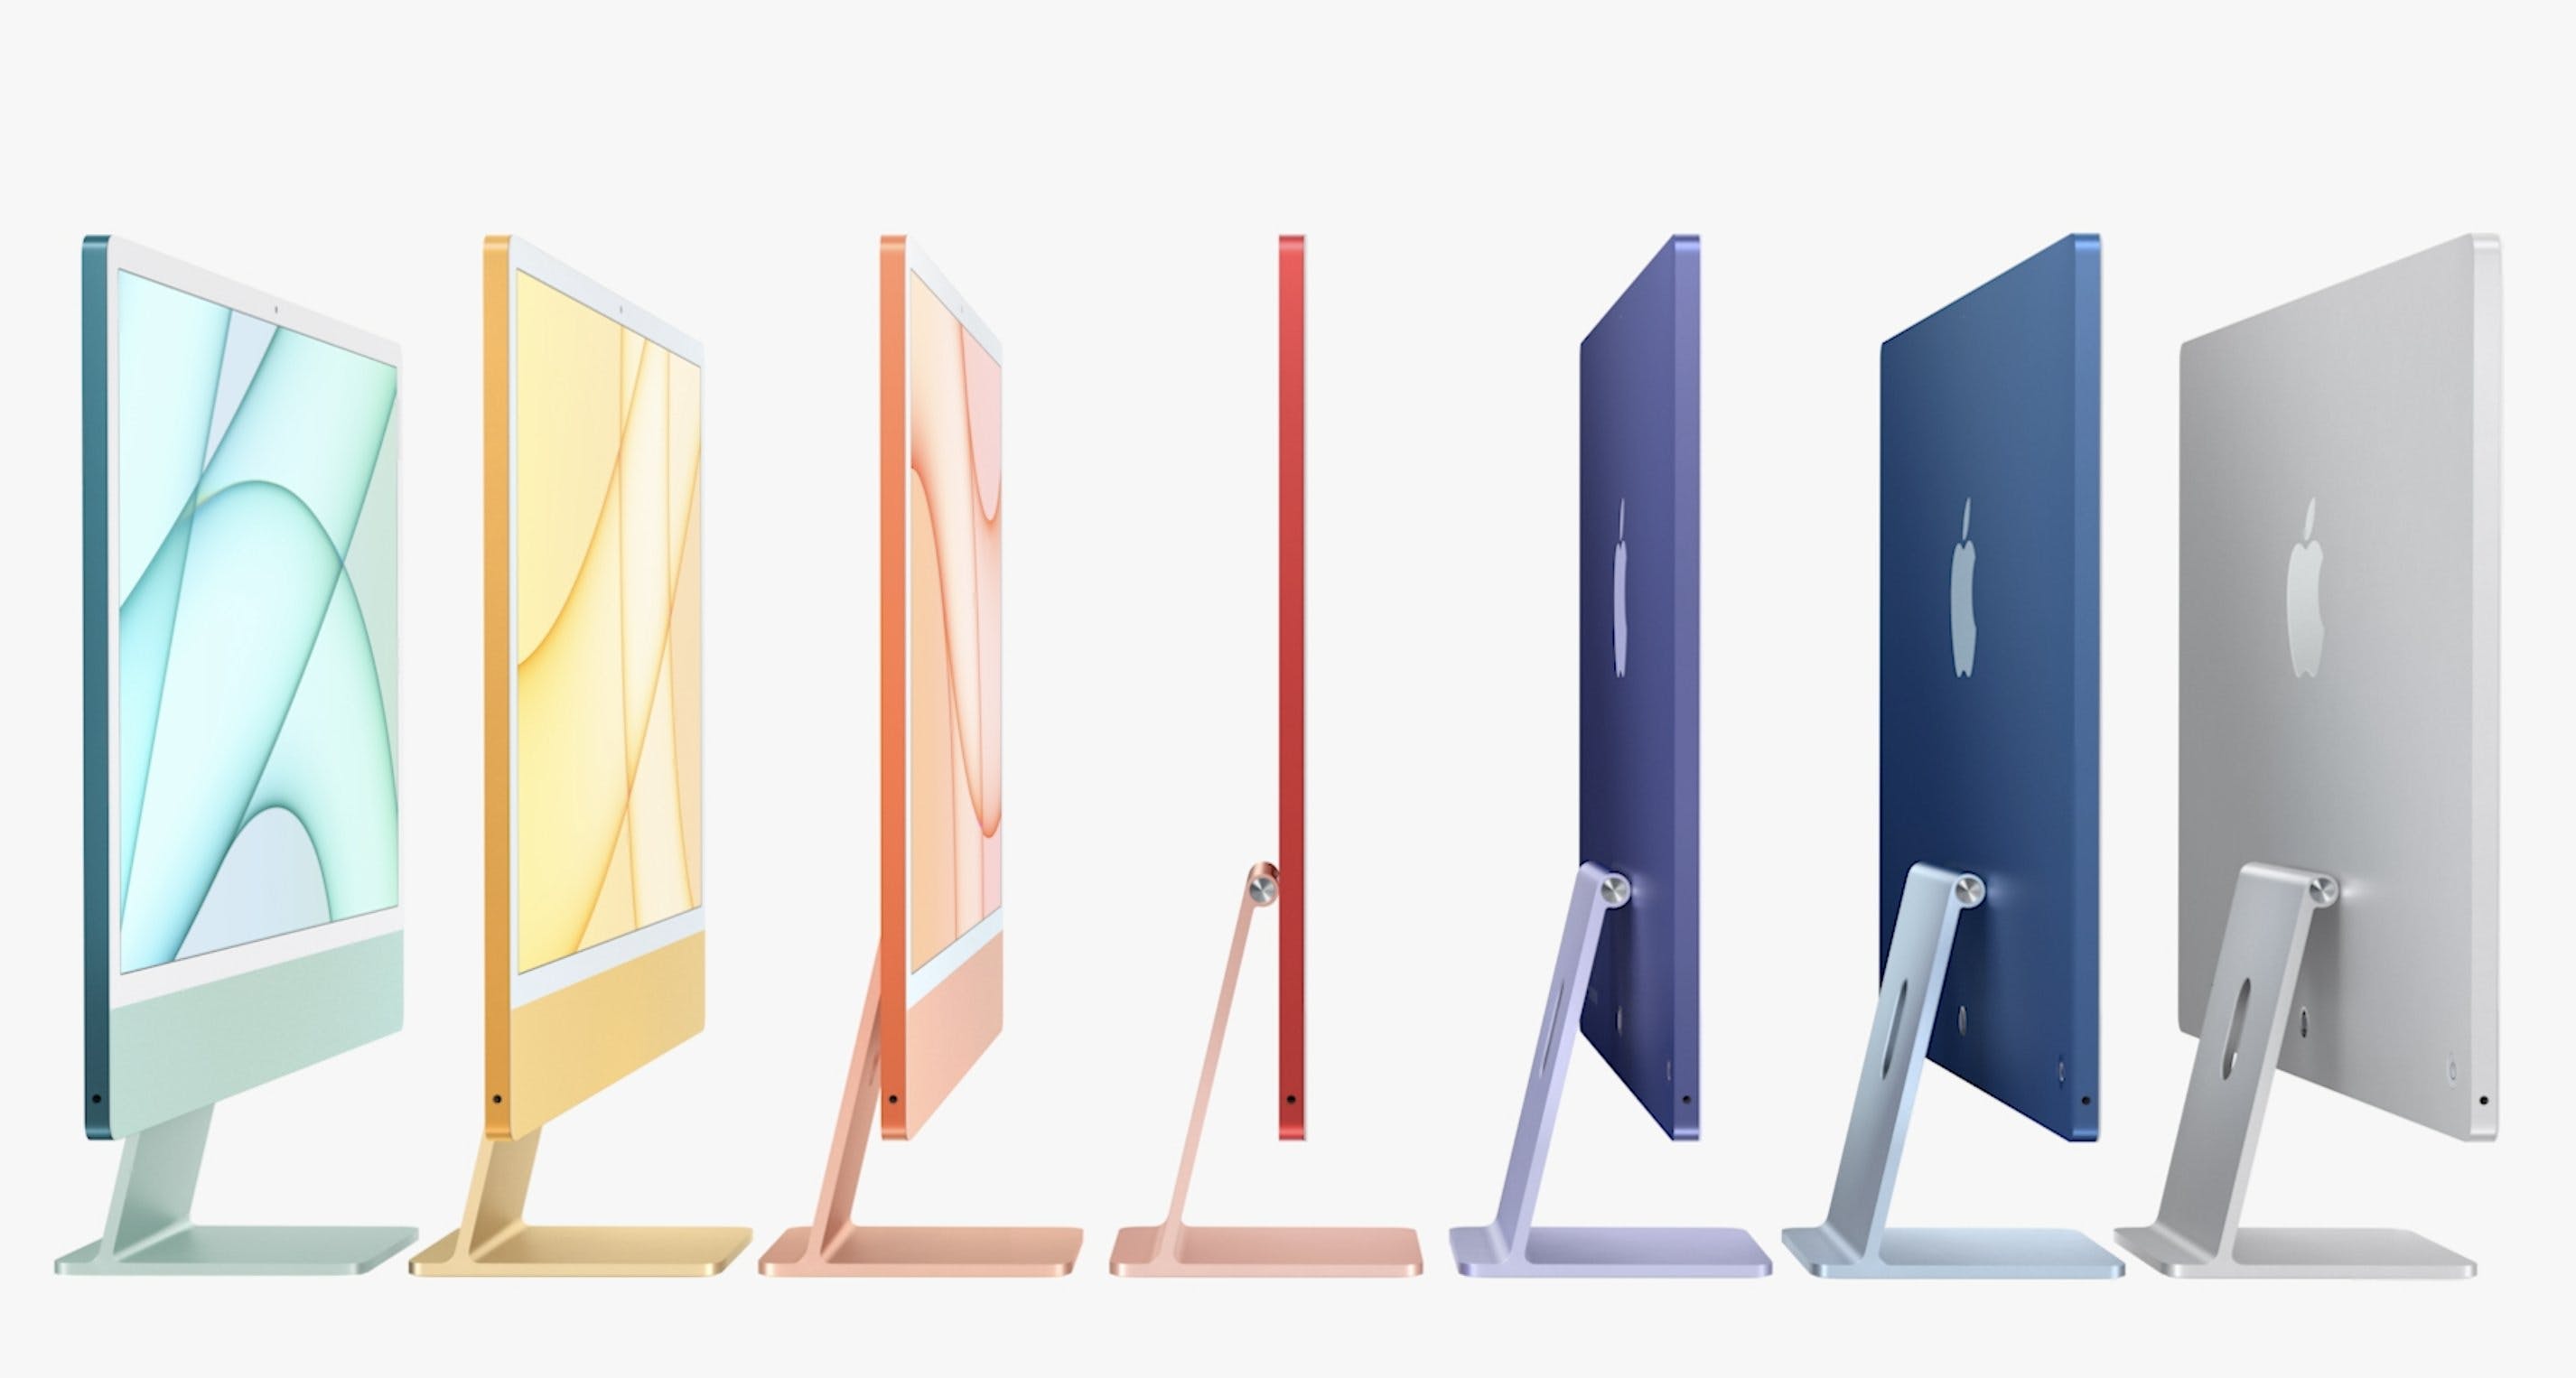 The new iMac comes in green, yellow, orange, pink, purple, blue, and silver.